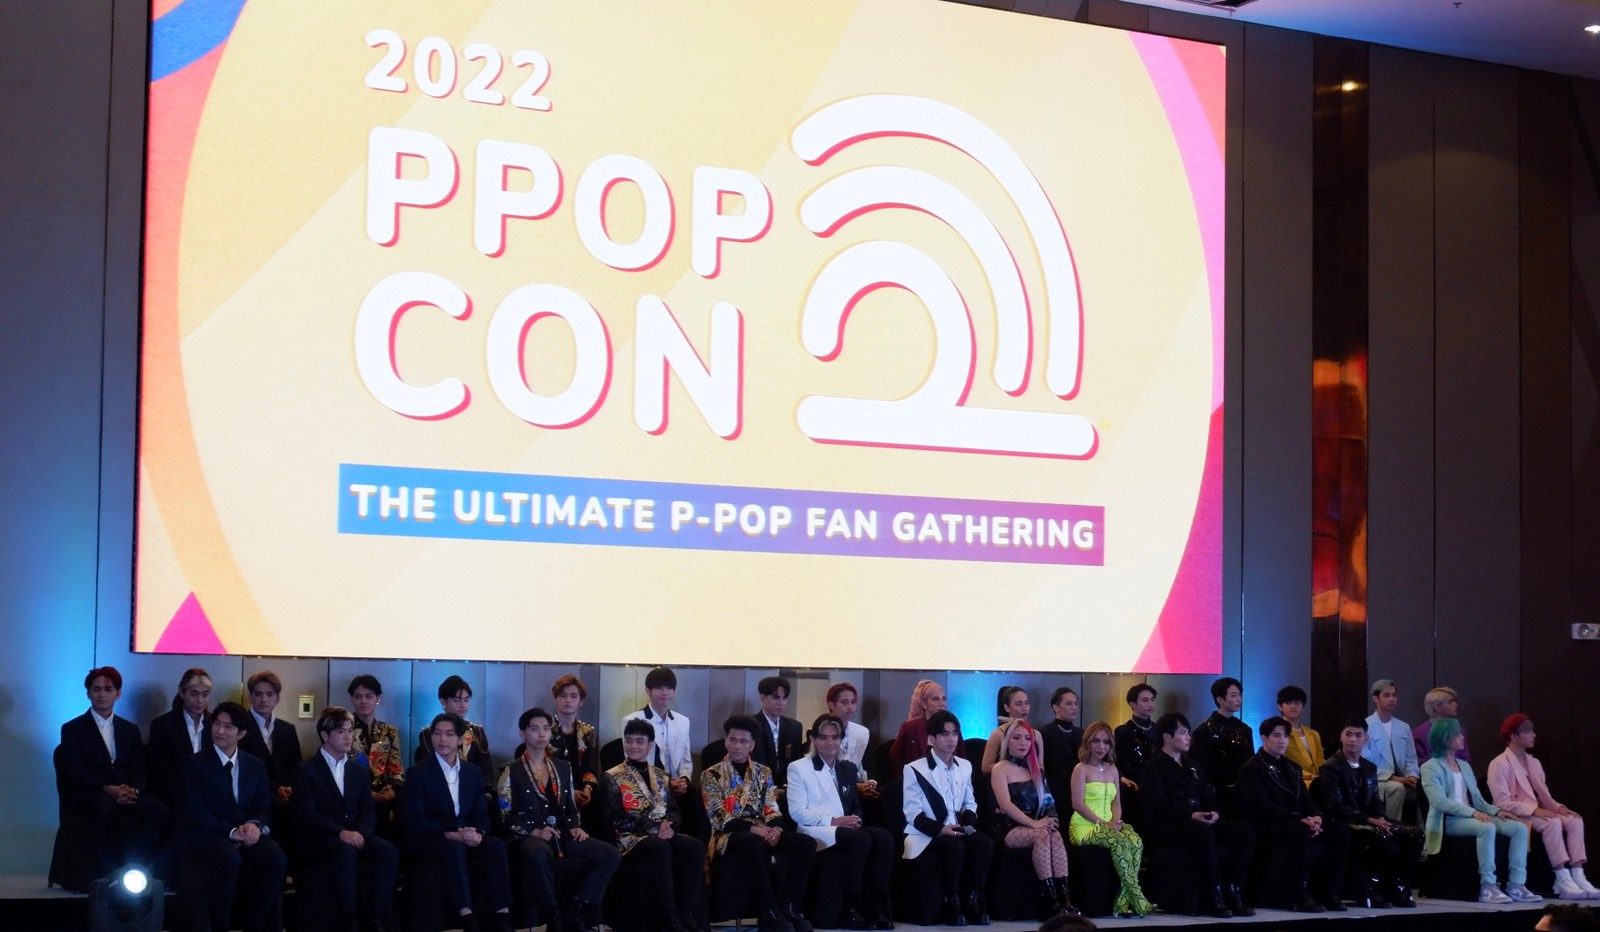 ‘Expect a blast’: SB19, MNL48, more P-pop groups excited for 2022 PPOPCON